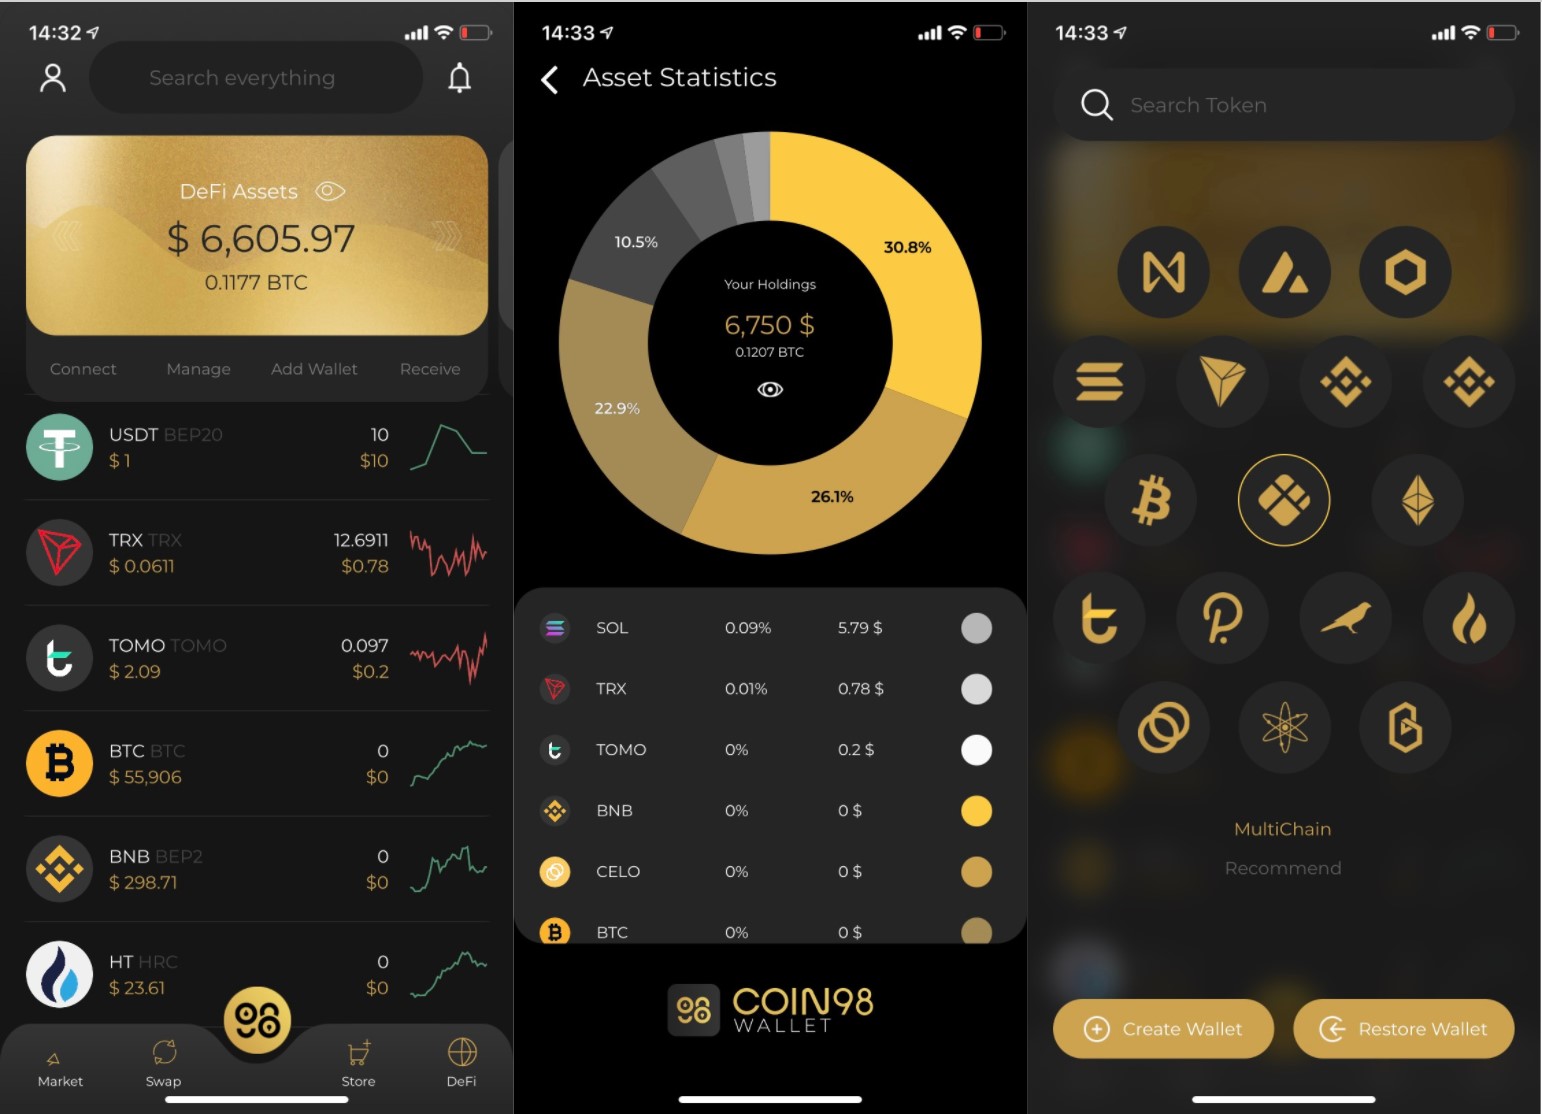 Coin98 wallet overview image